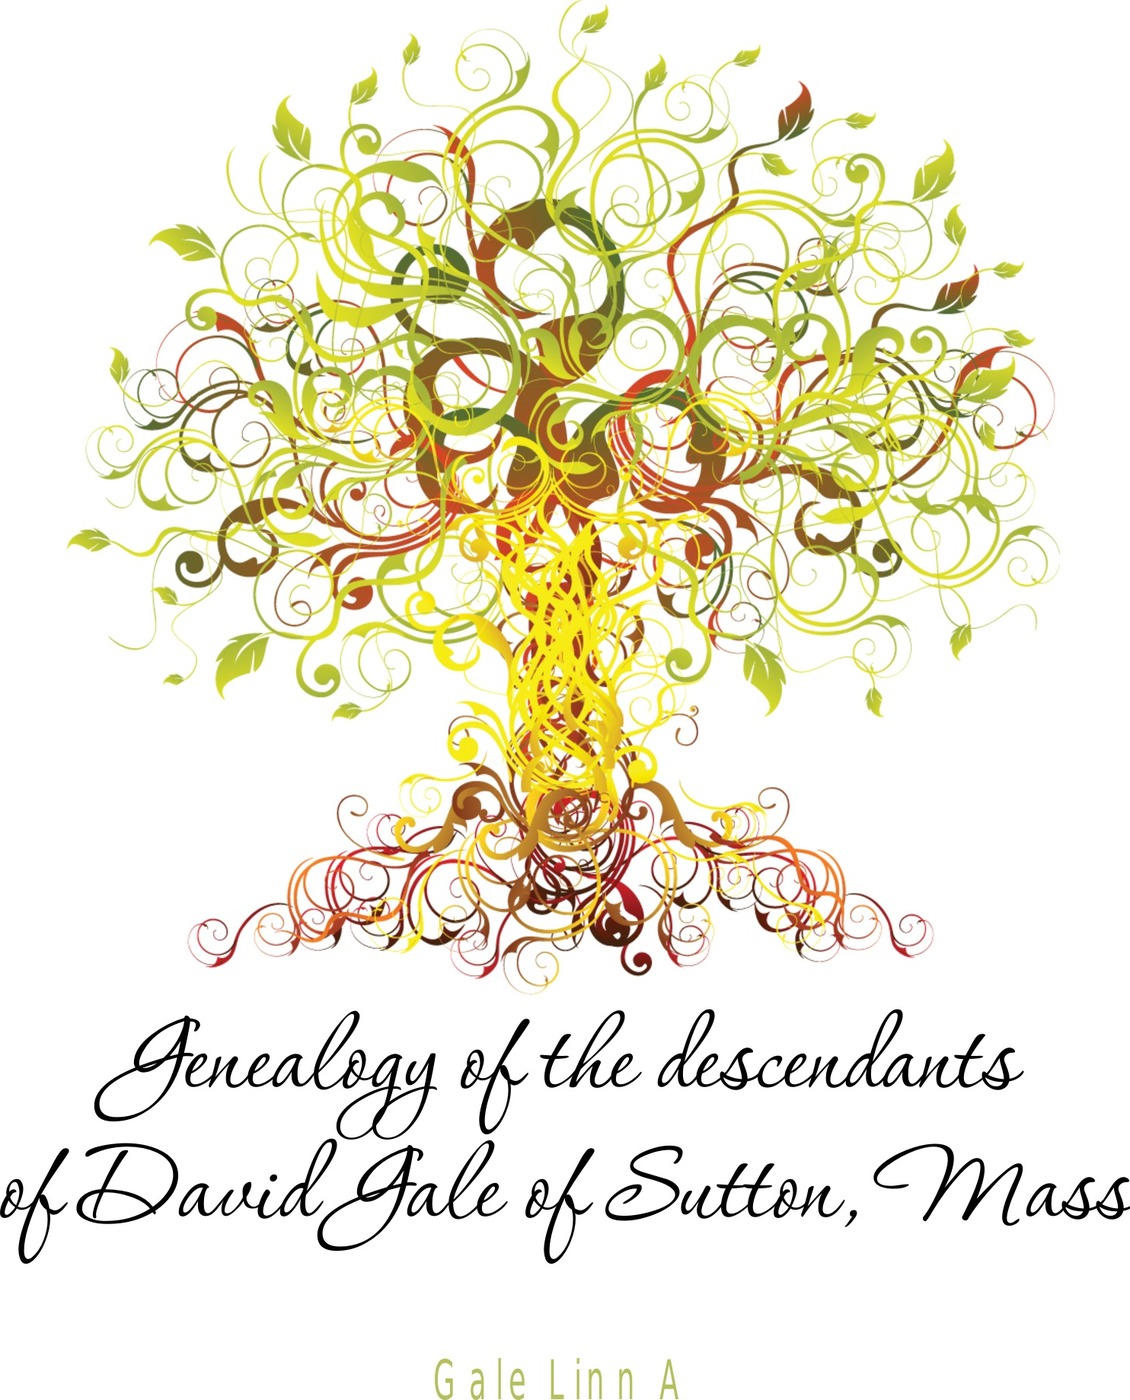 Genealogy of the descendants of David Gale of Sutton, Mass